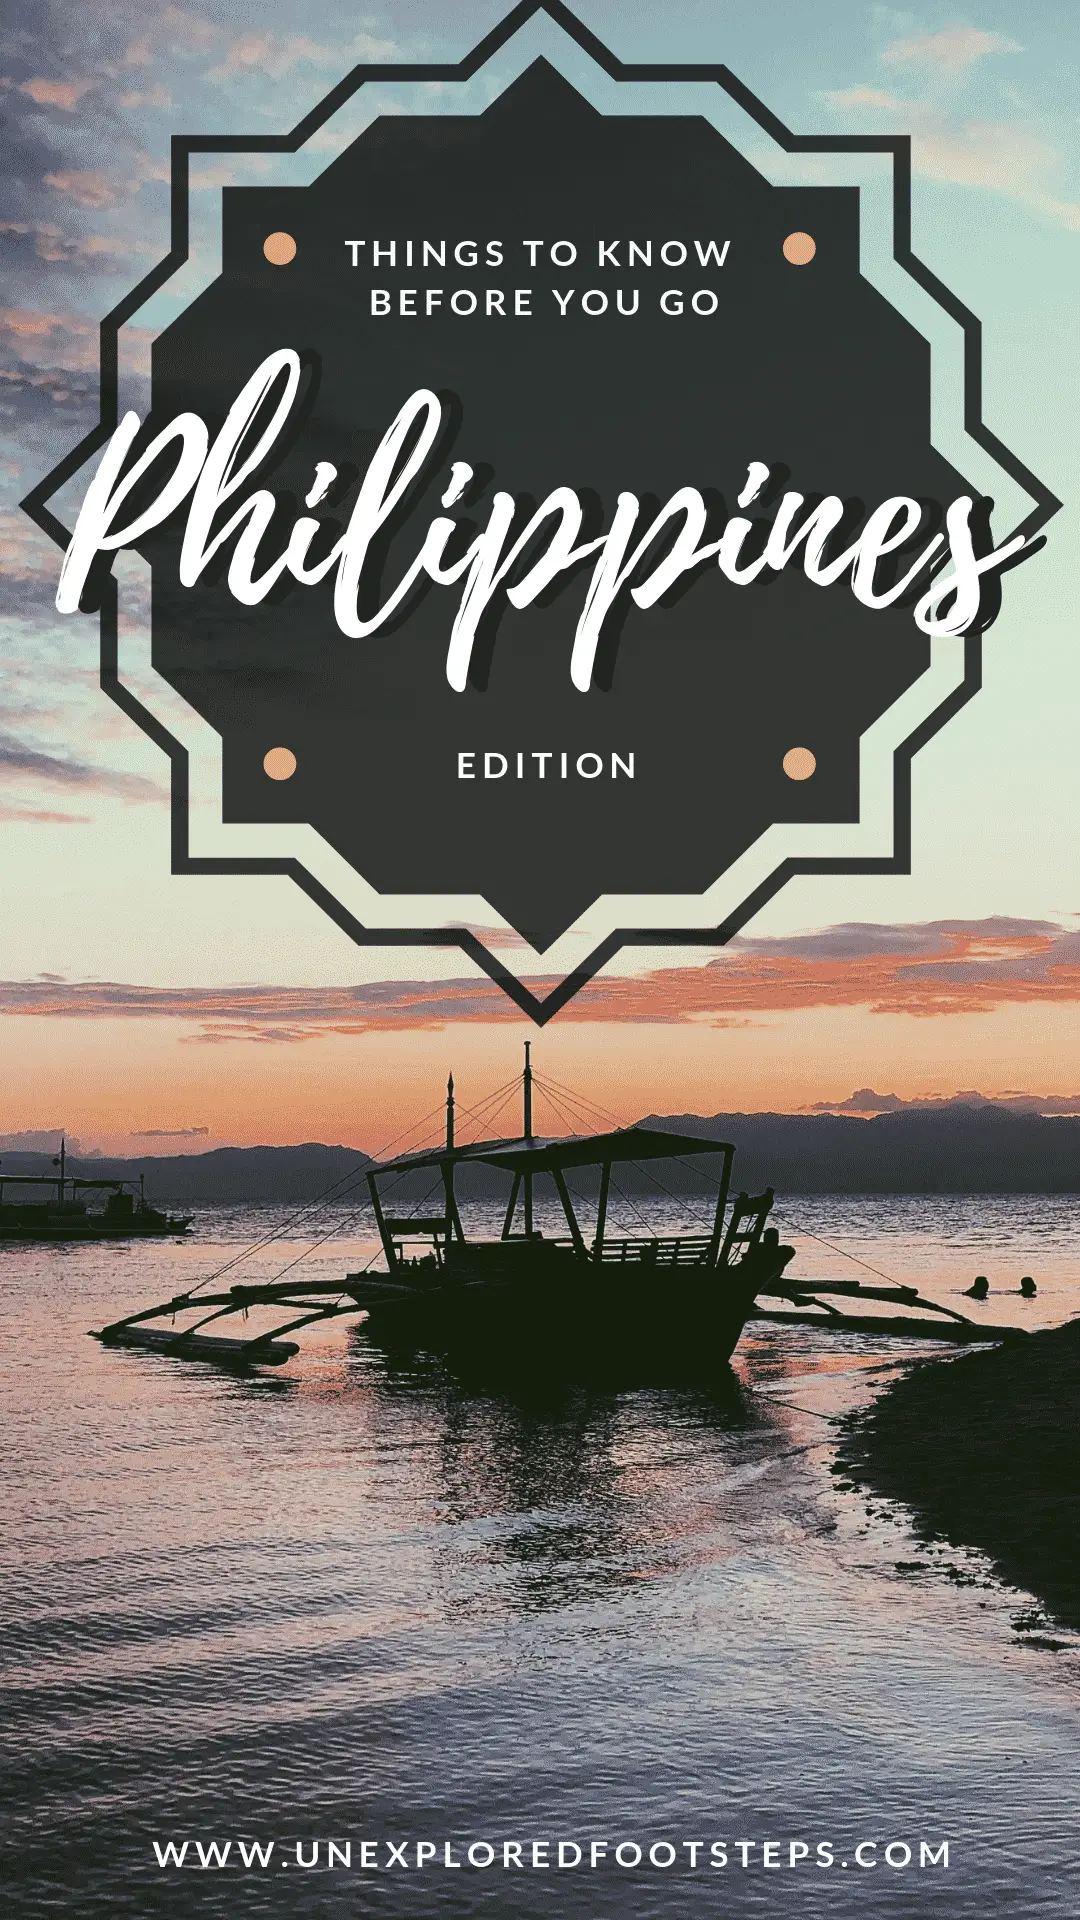 Things to know before you go to the Philippines